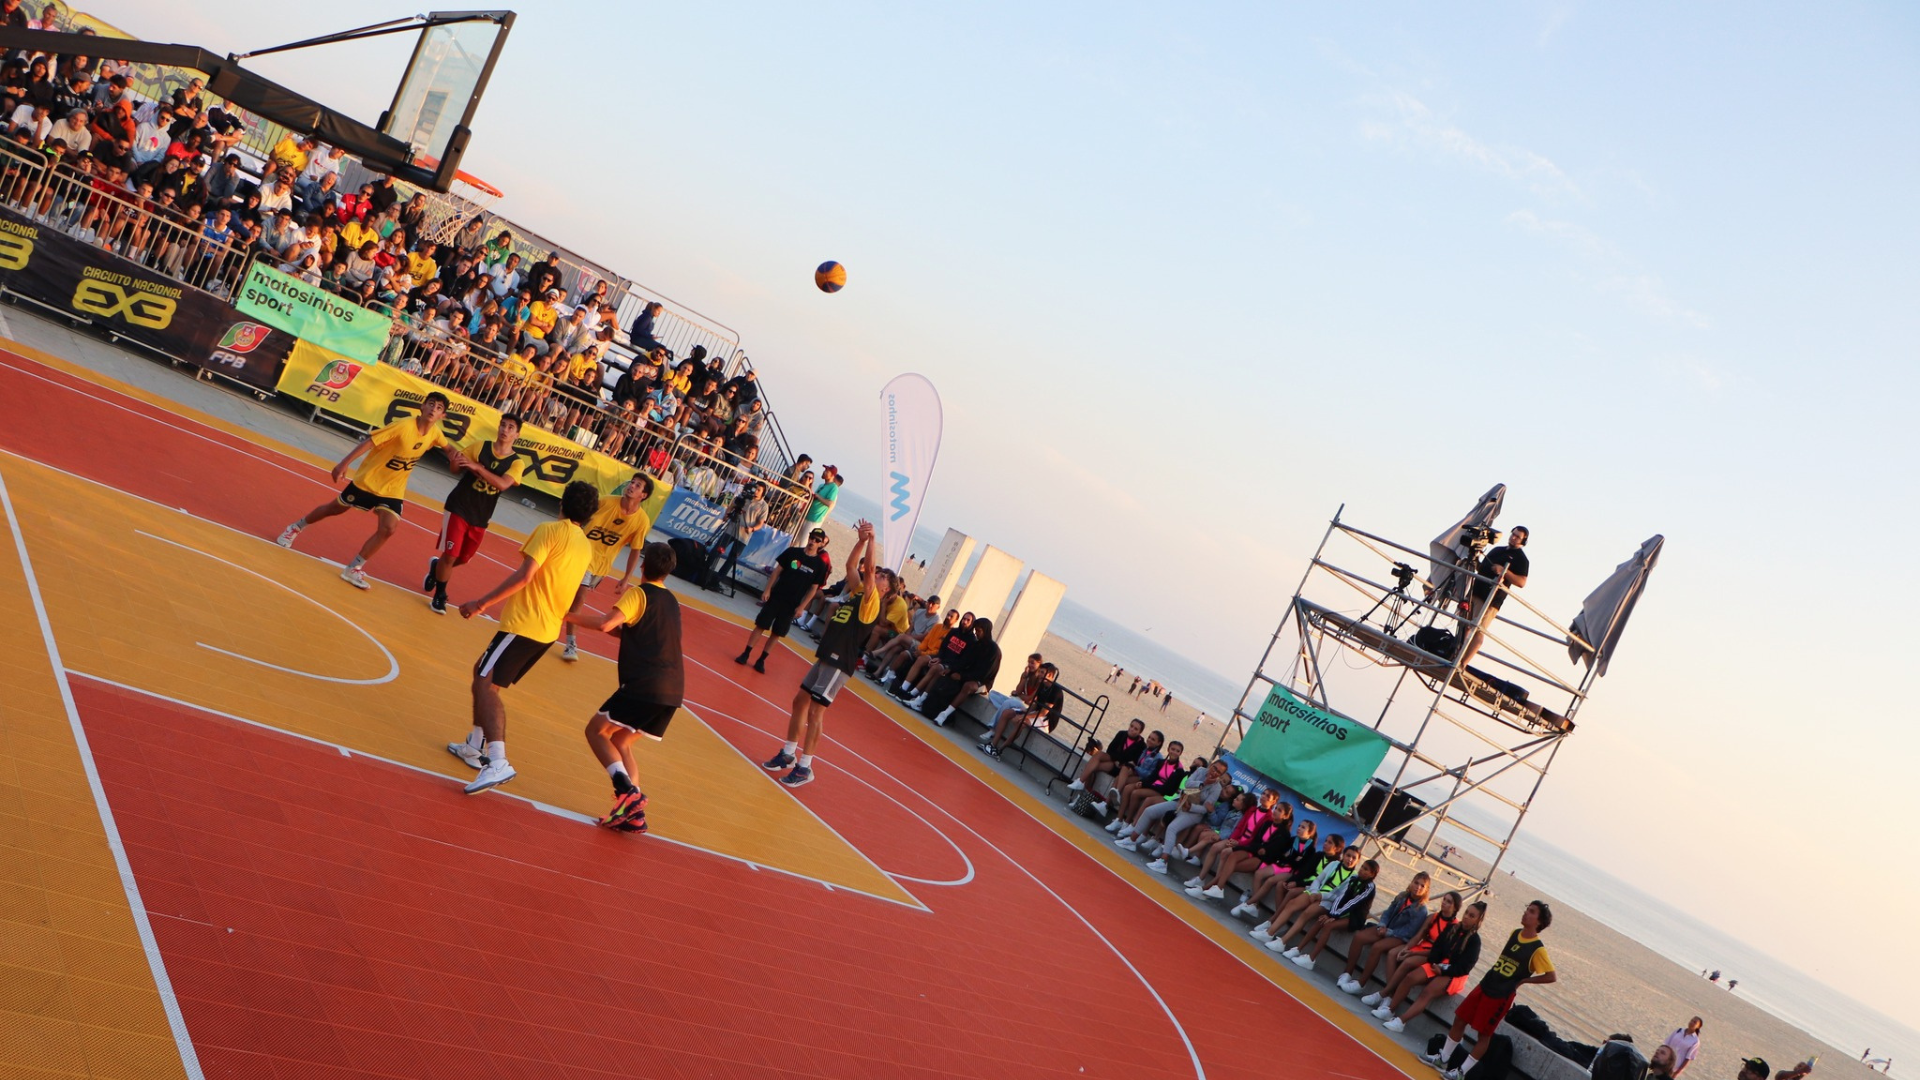 2022 FPB 3x3 Basketball Circuit Final Stage